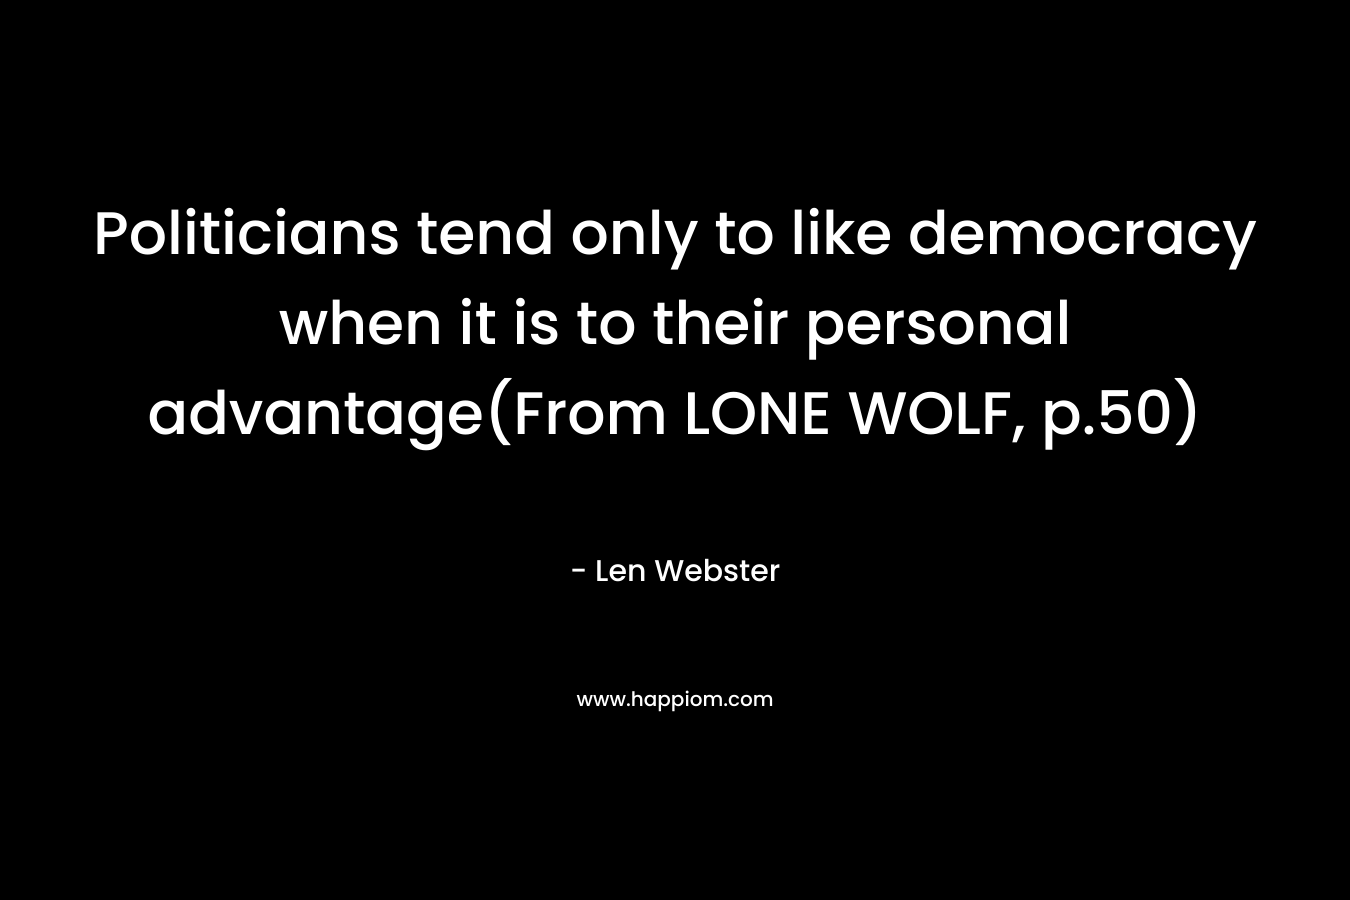 Politicians tend only to like democracy when it is to their personal advantage(From LONE WOLF, p.50)